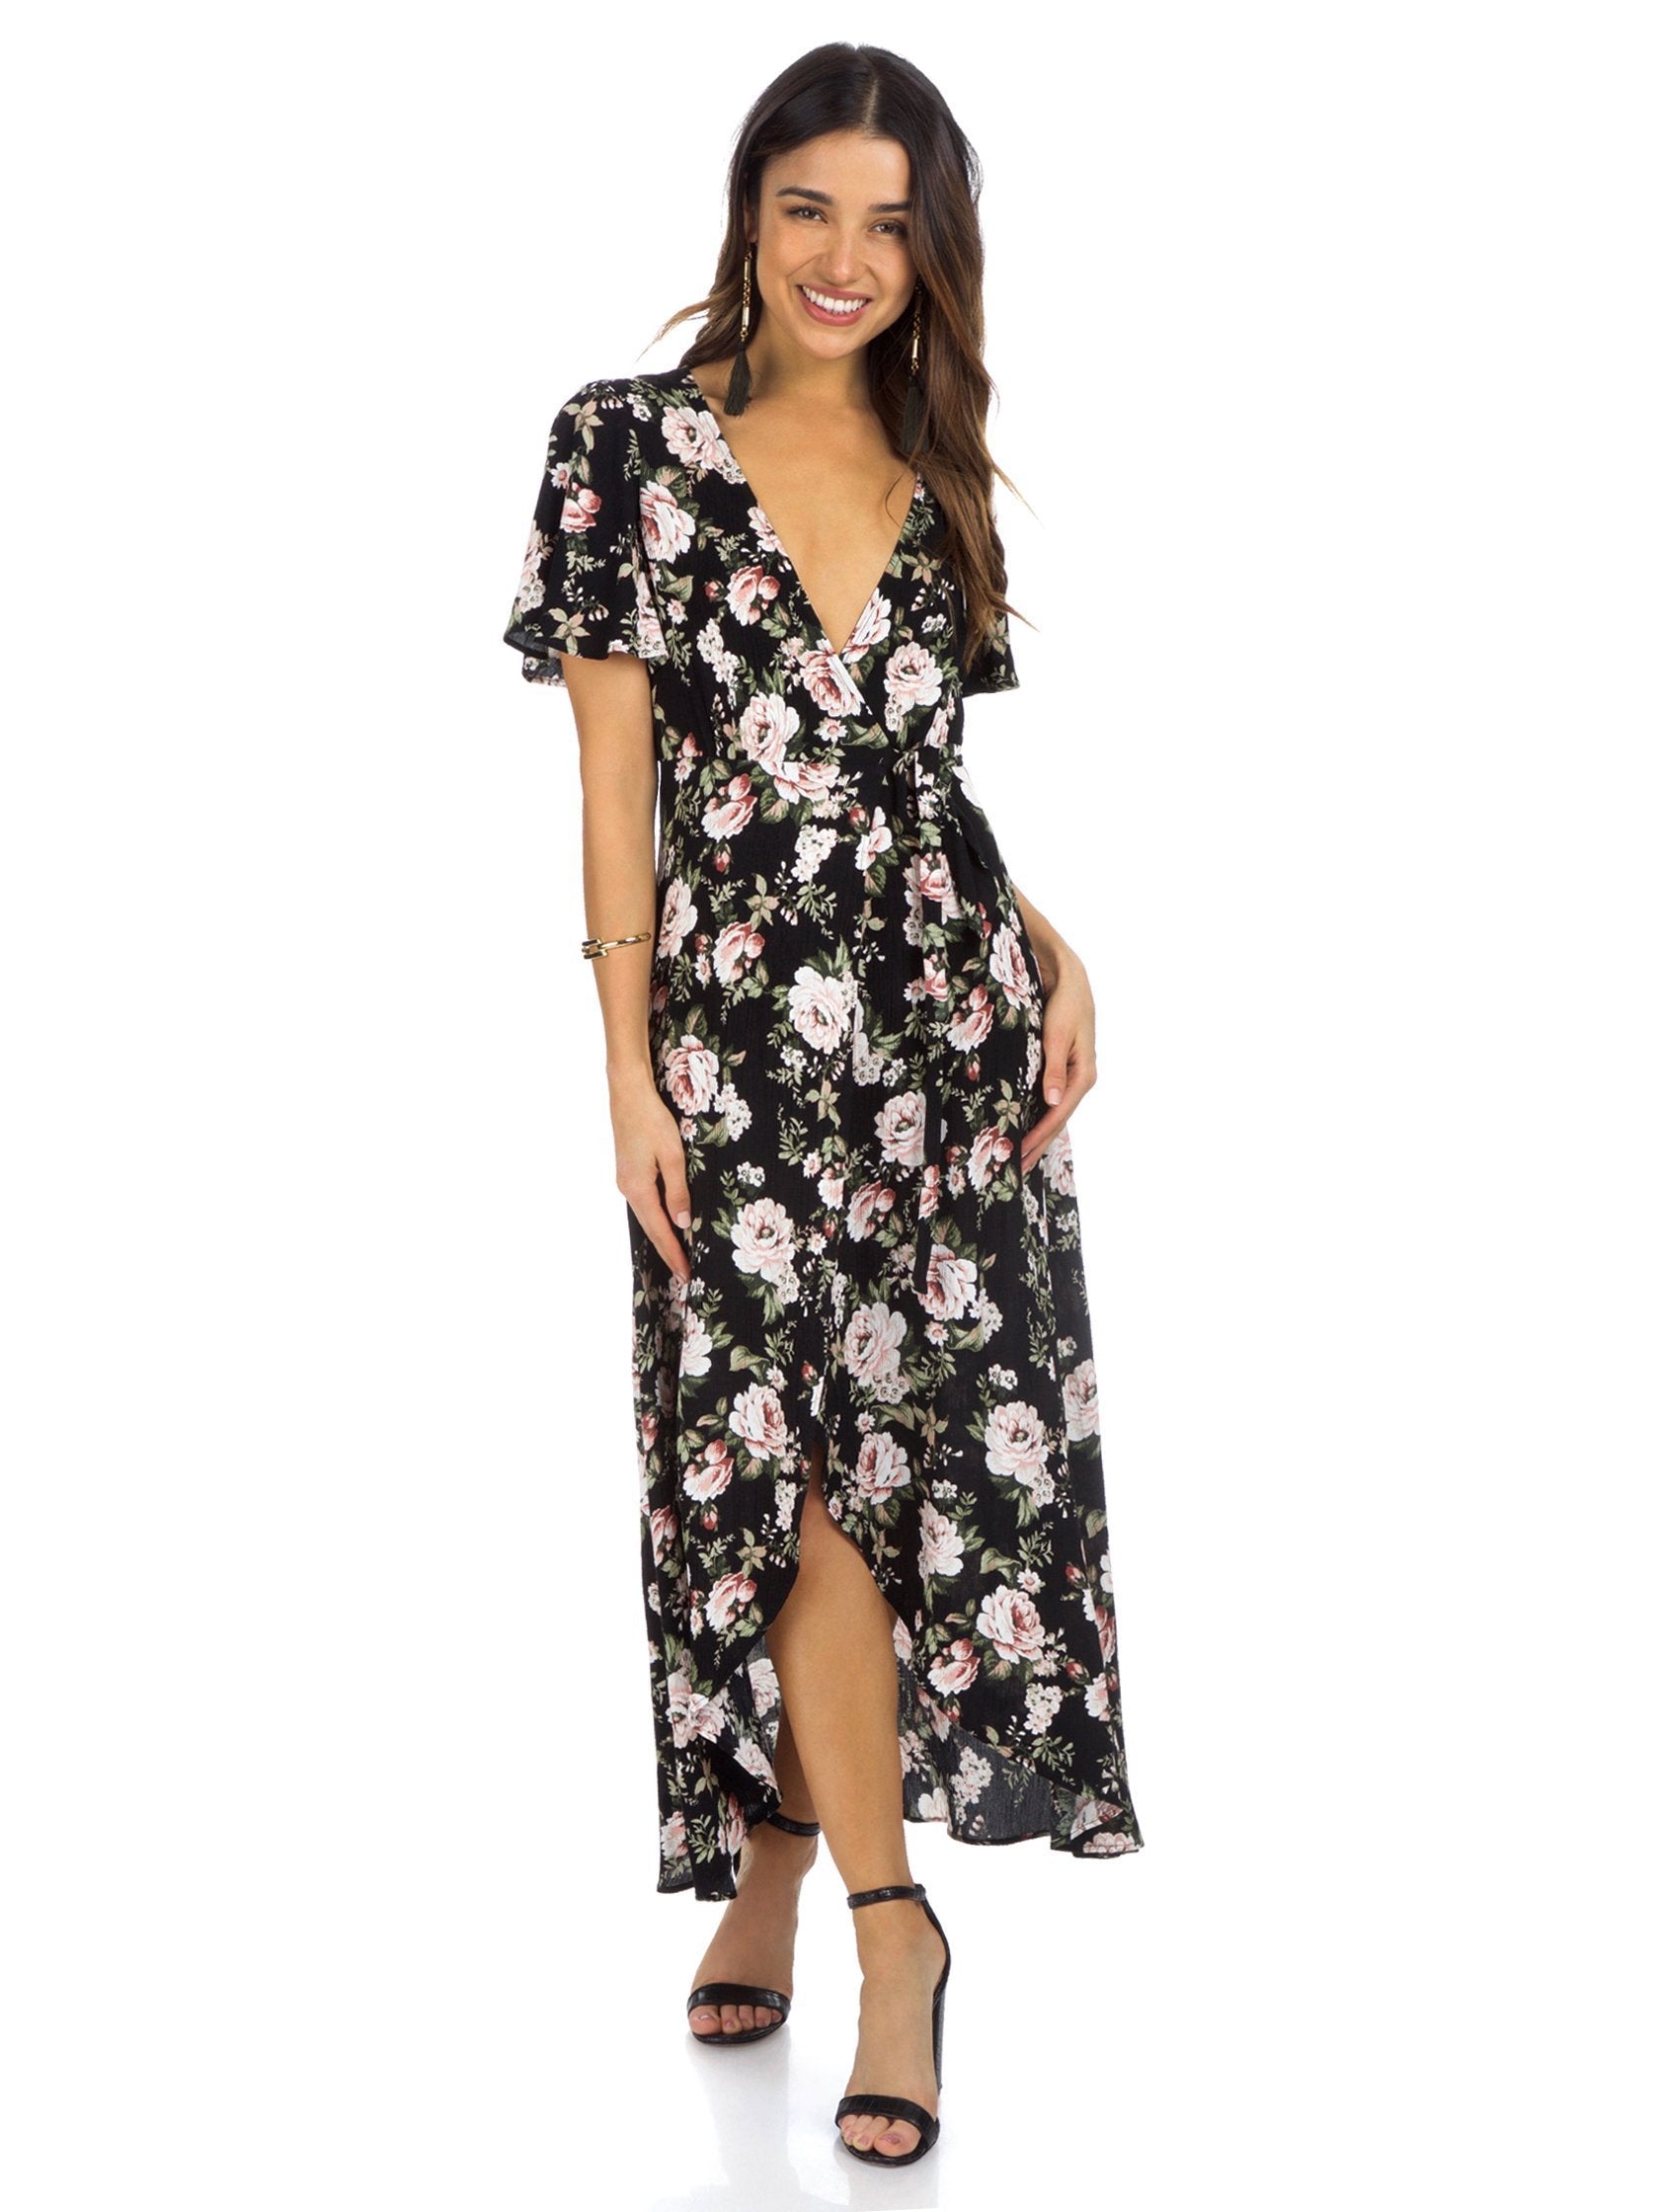 Girl outfit in a dress rental from Show Me Your Mumu called Marianne Wrap Dress